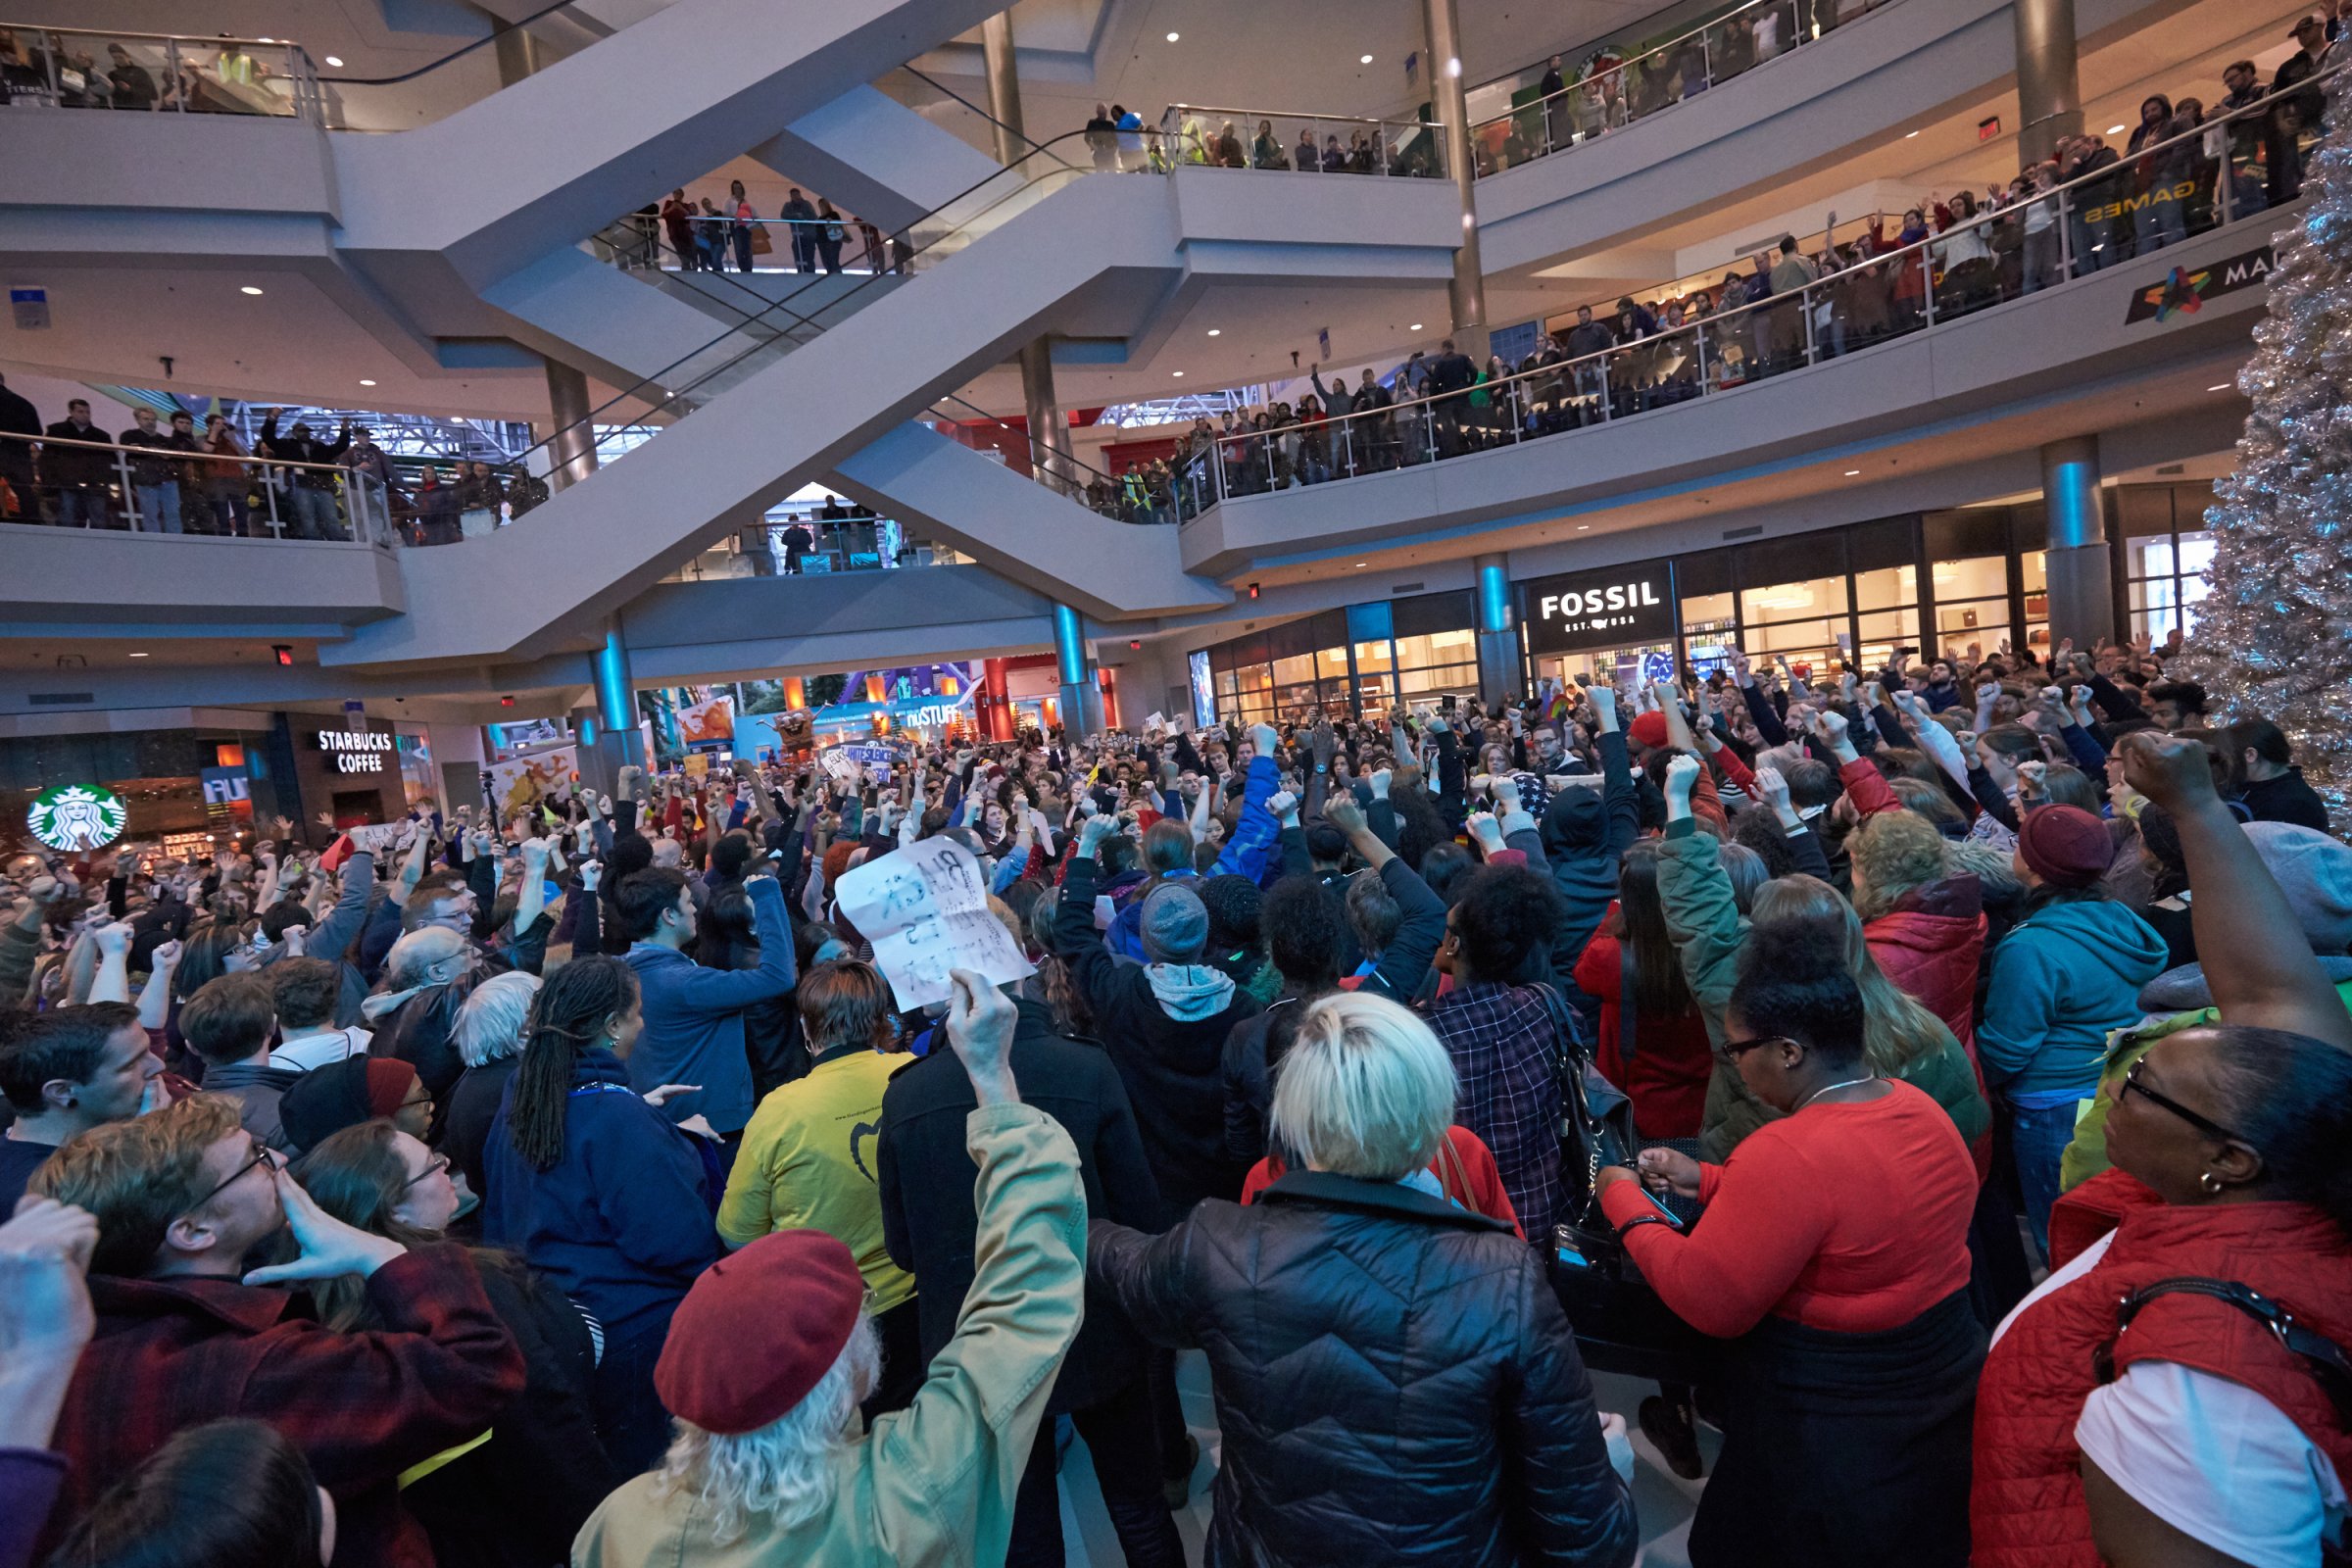 Thousands of protesters from the group "Black Lives Matter" disrupt holiday shoppers on Dec. 20, 2014 at Mall of America in Bloomington, Minnesota.